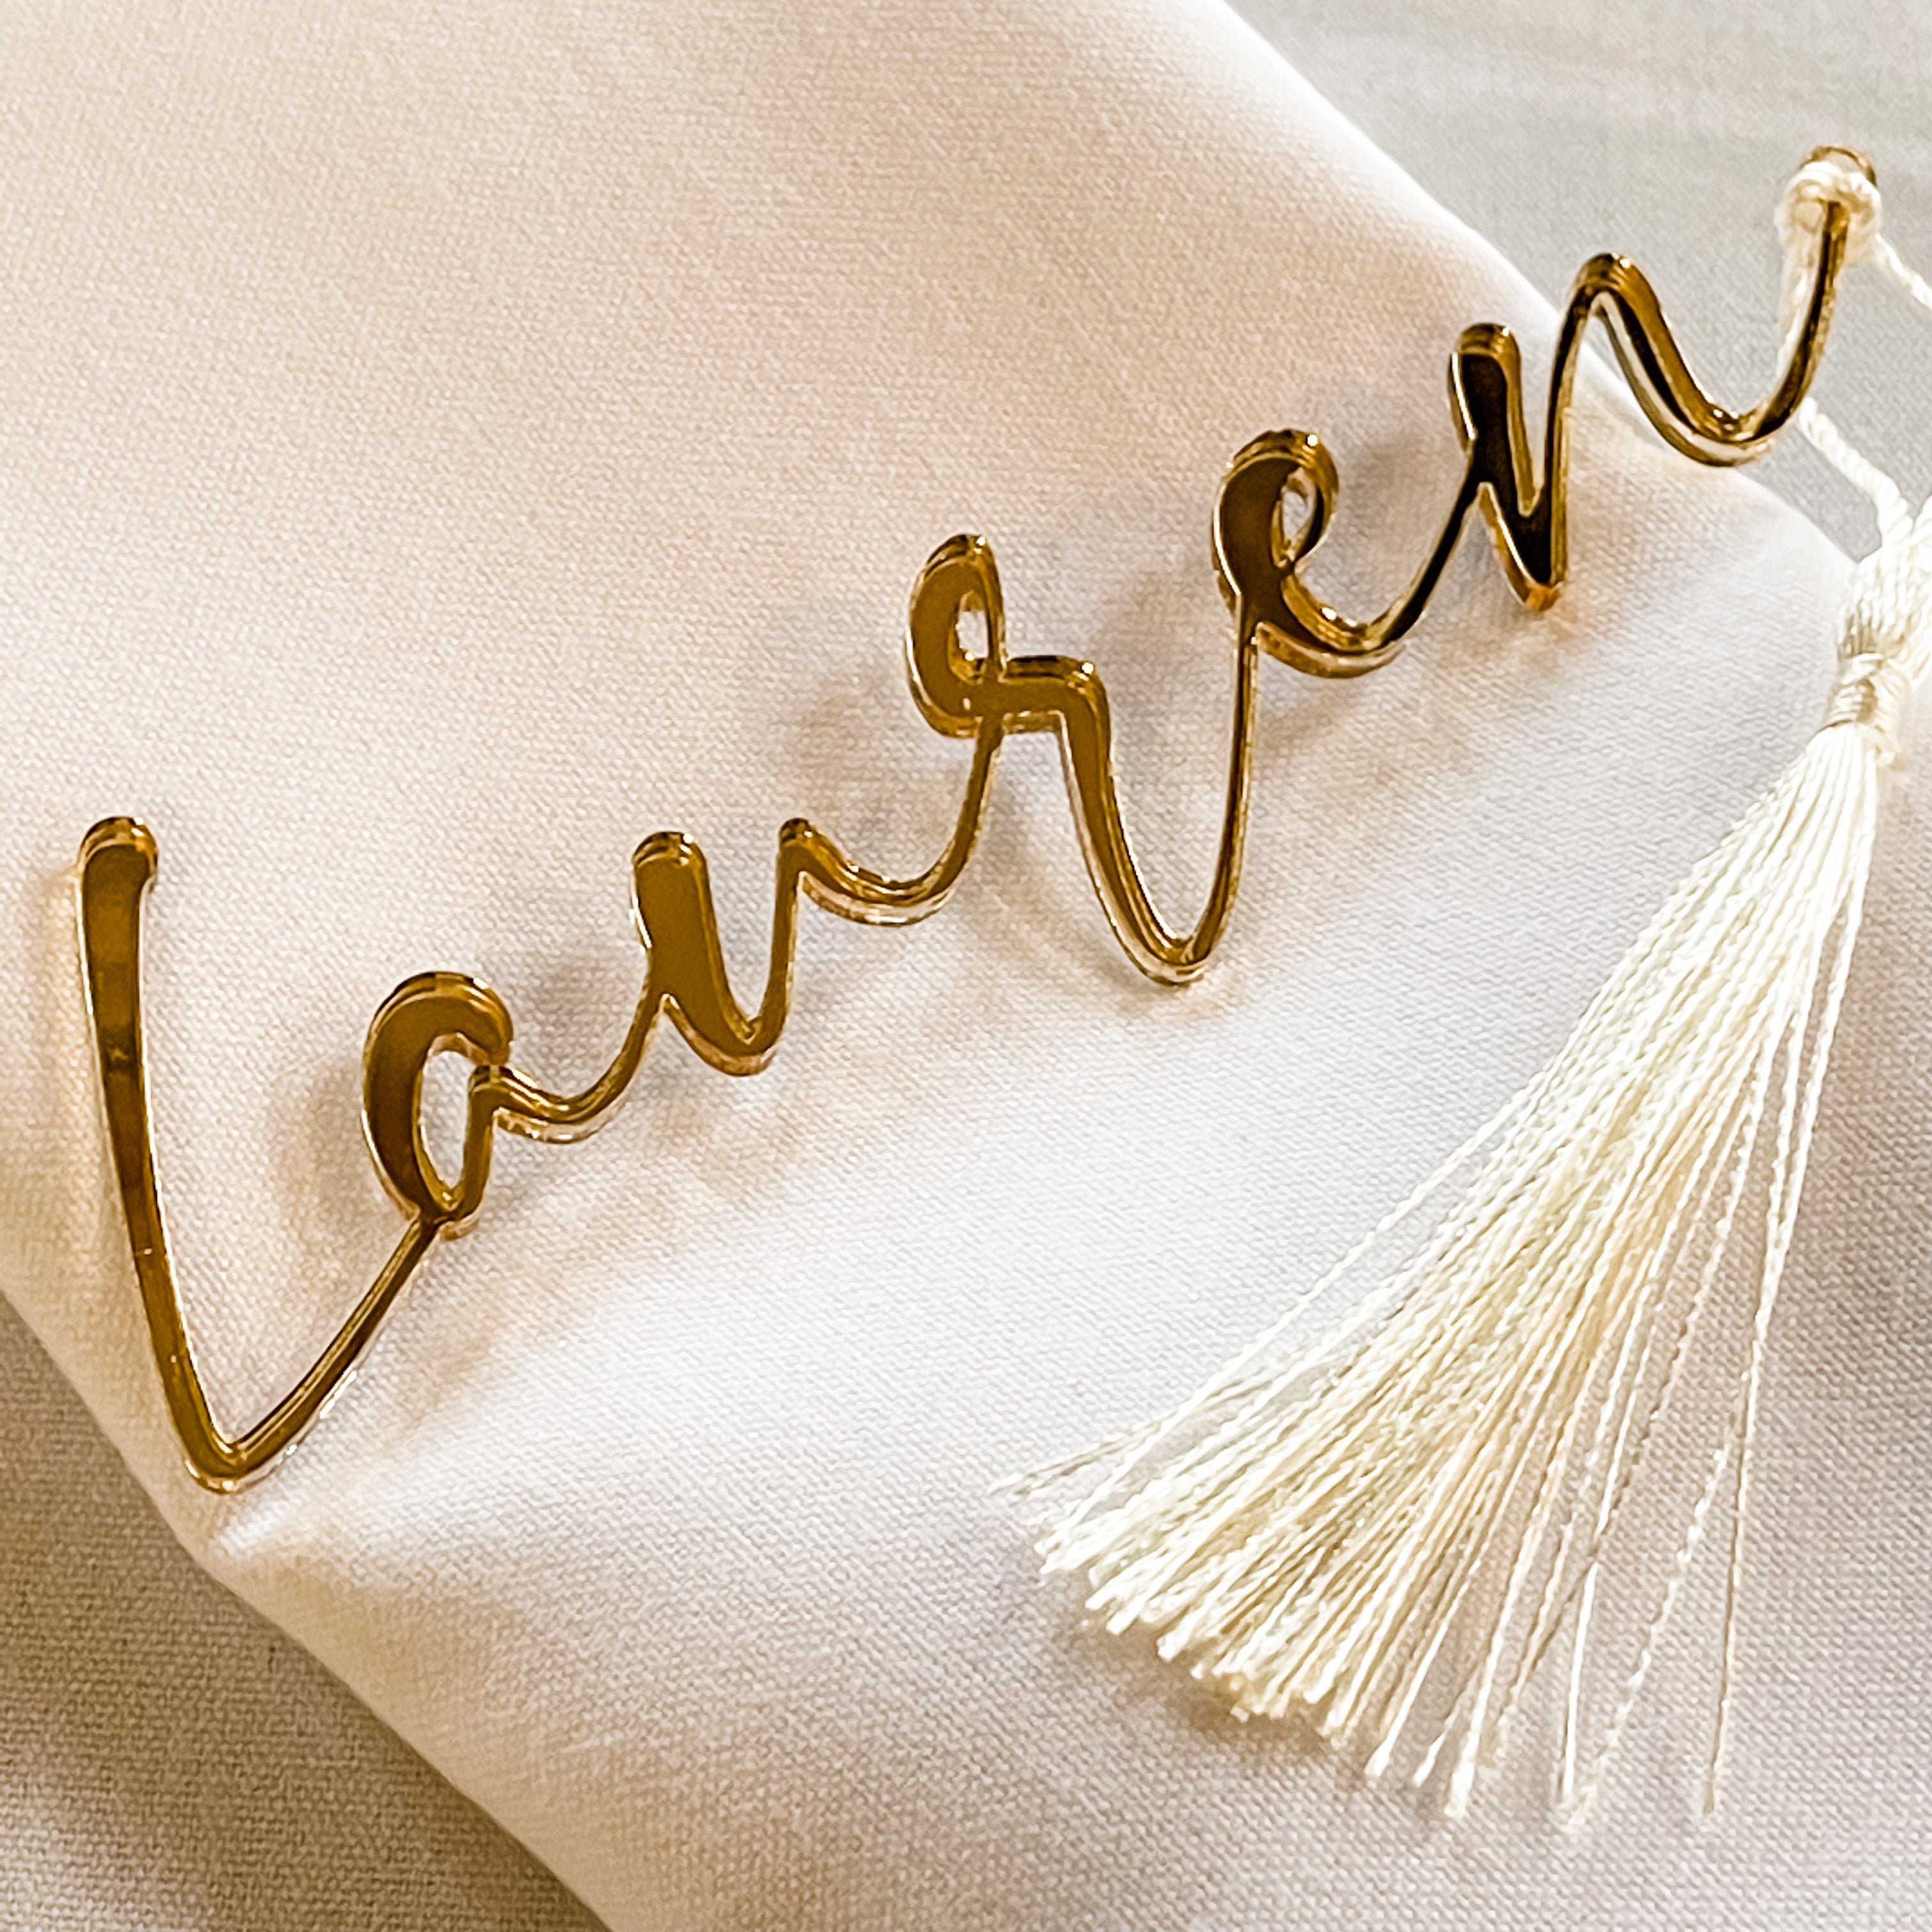 Luxury Wedding Place Names With Tassel